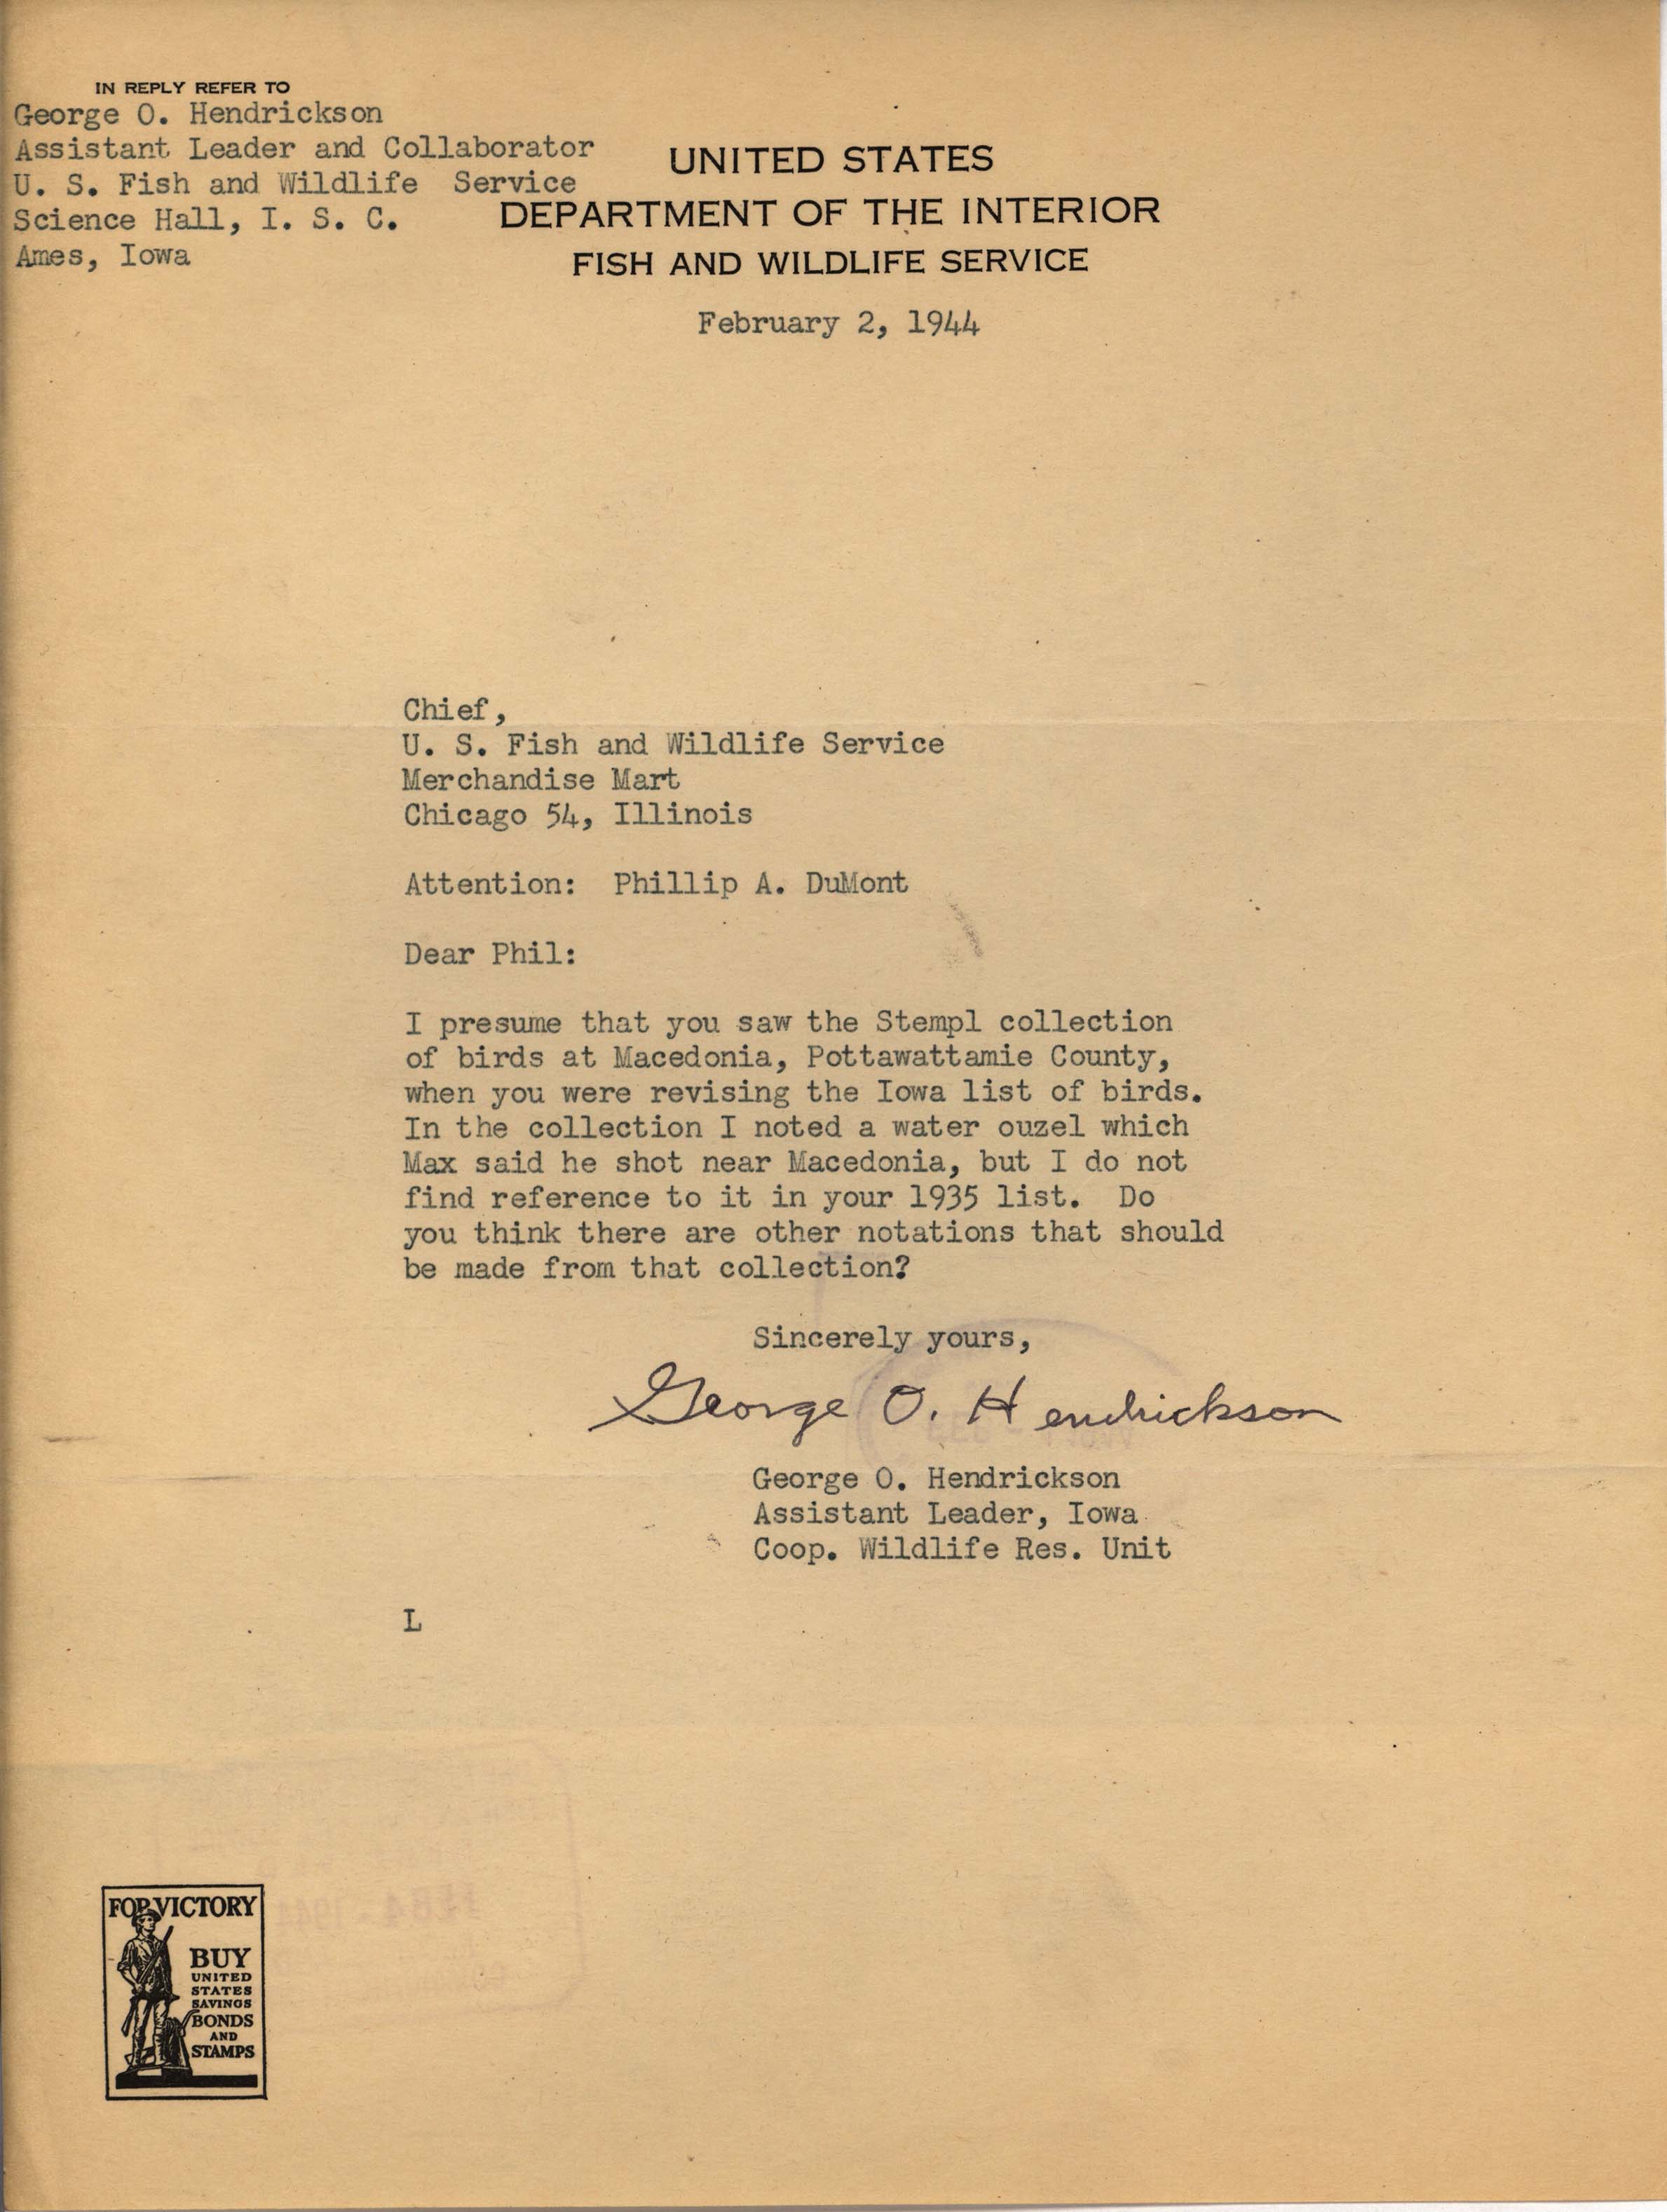 George Hendrickson letter to Philip DuMont regarding unlisted Water Ouzel, February 2, 1944